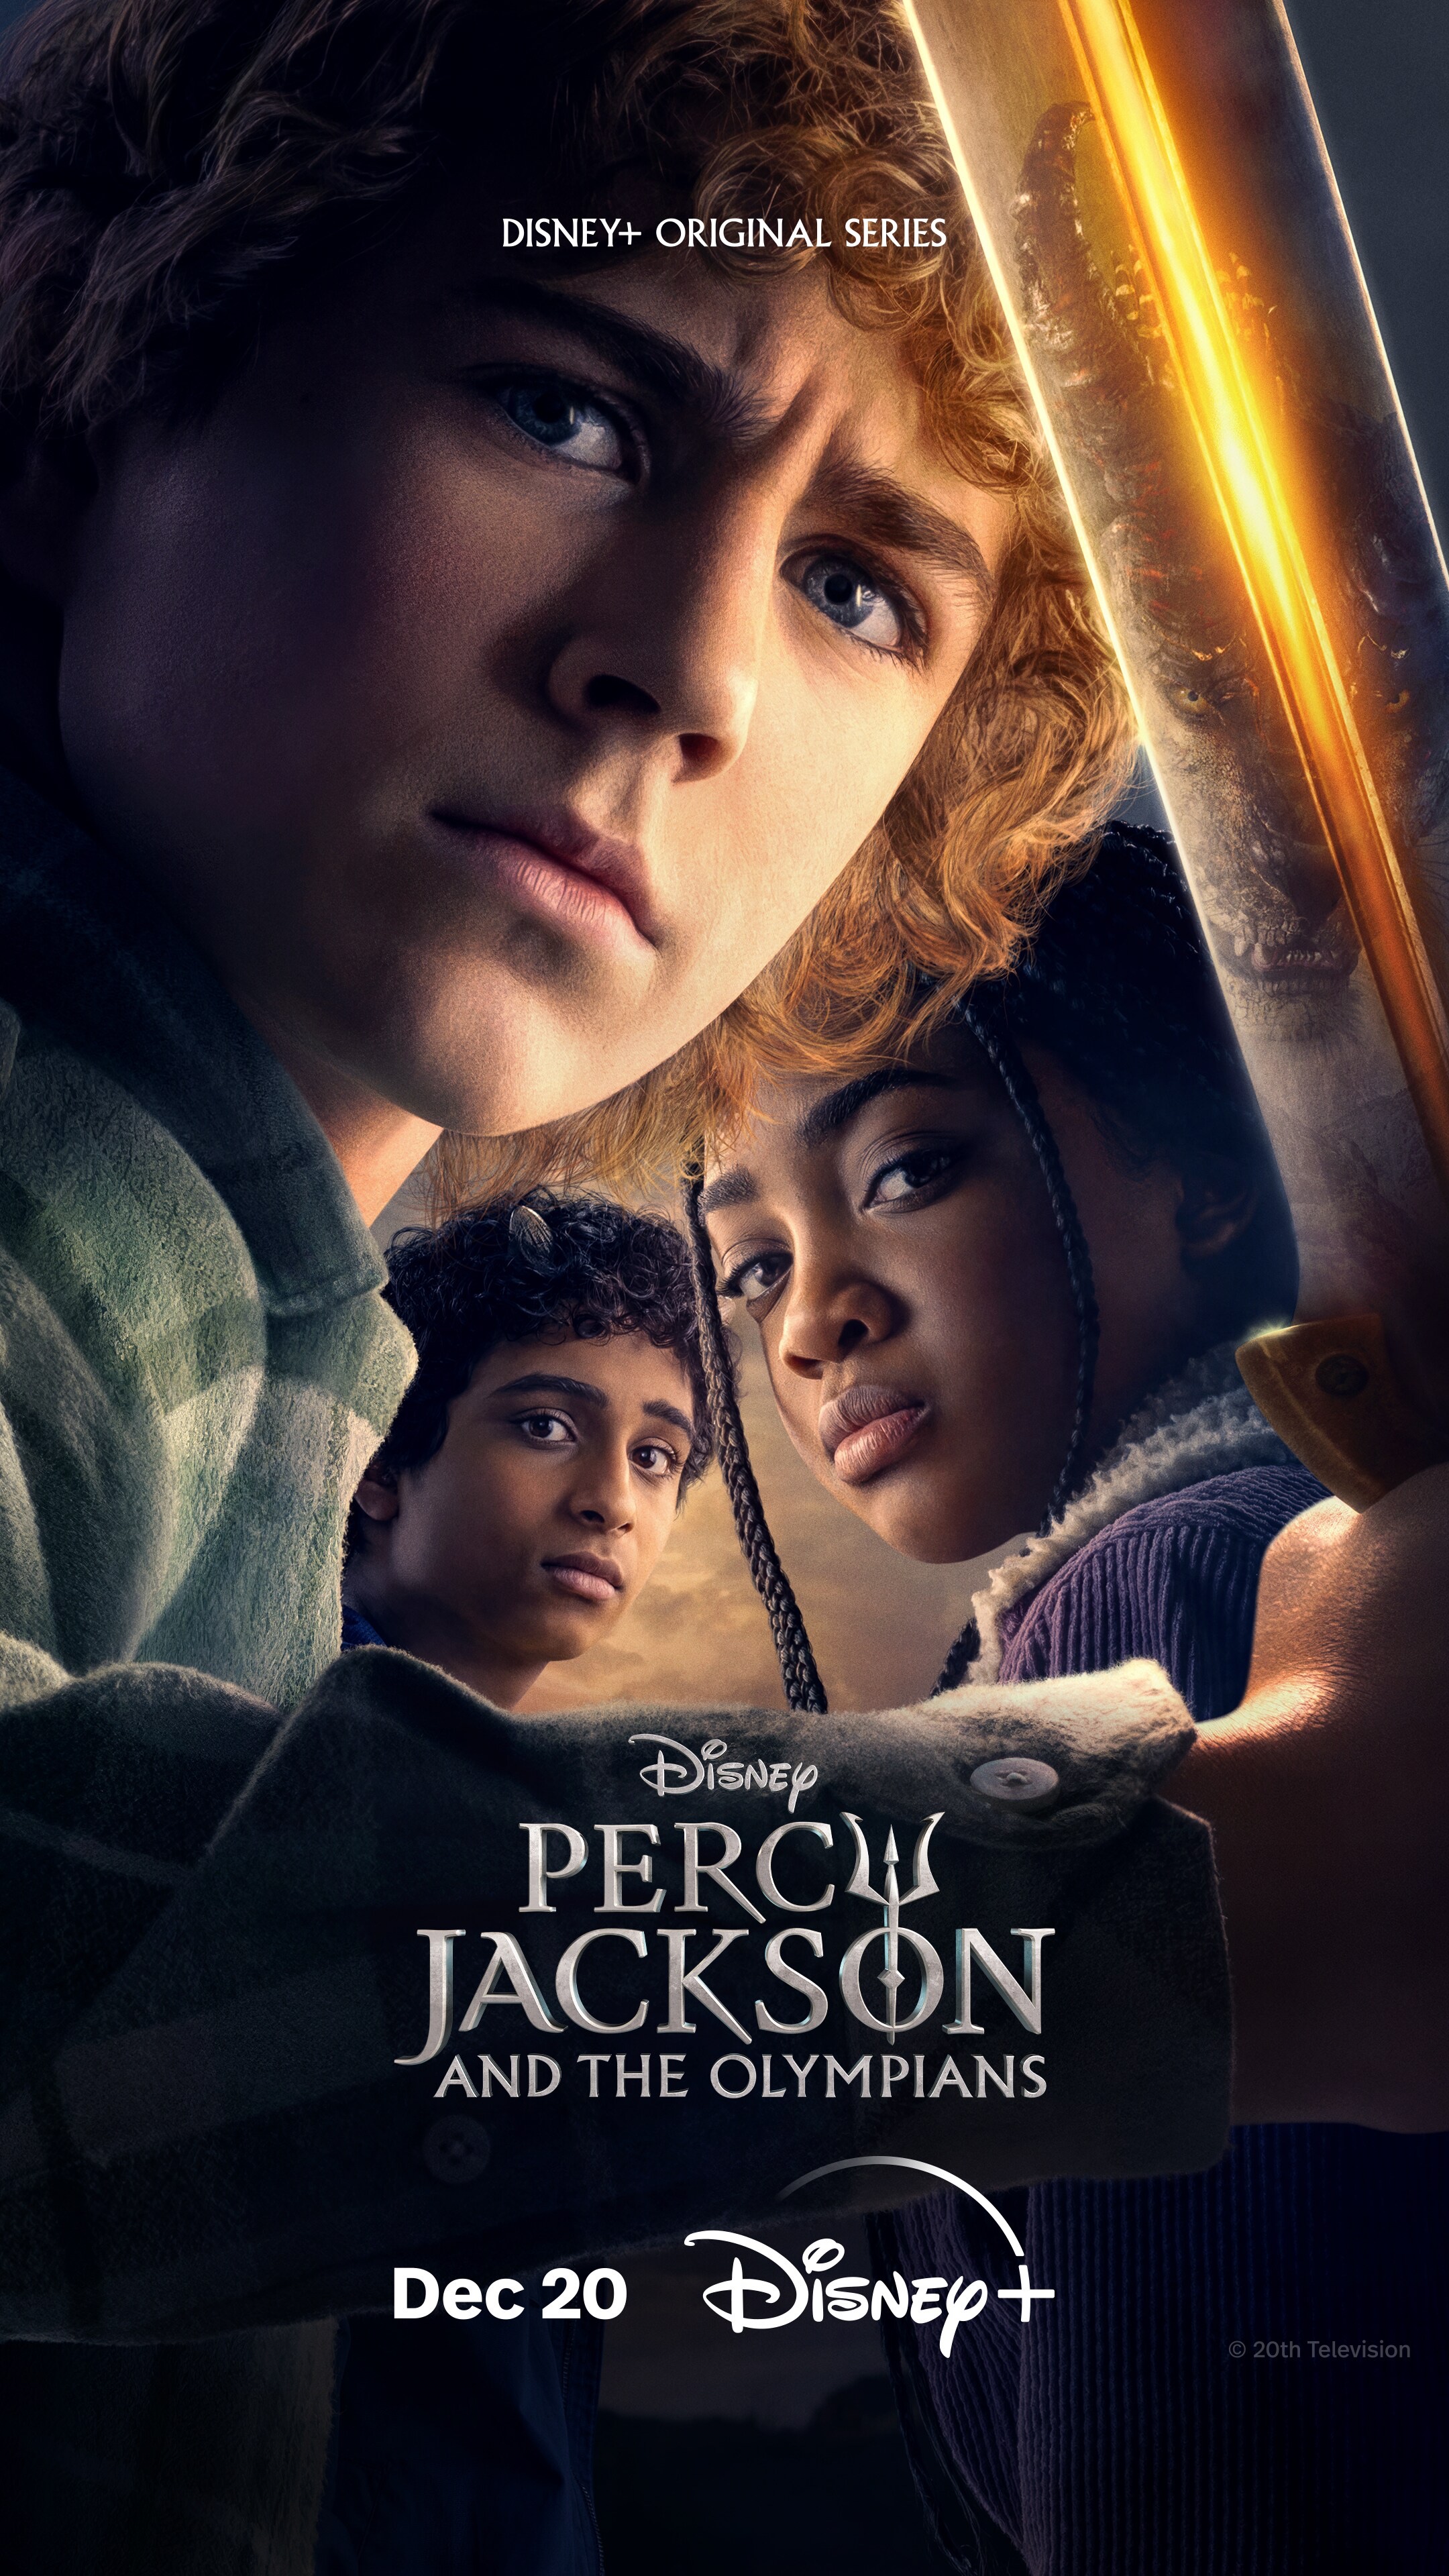 Promotional poster dated December 20 for Percy Jackson and the Olympians, the Disney tv series, depicts a close-up of Percy Jackson holding a sword. Annabeth Chase and Grover Underwood are behind him with the same serious expression.